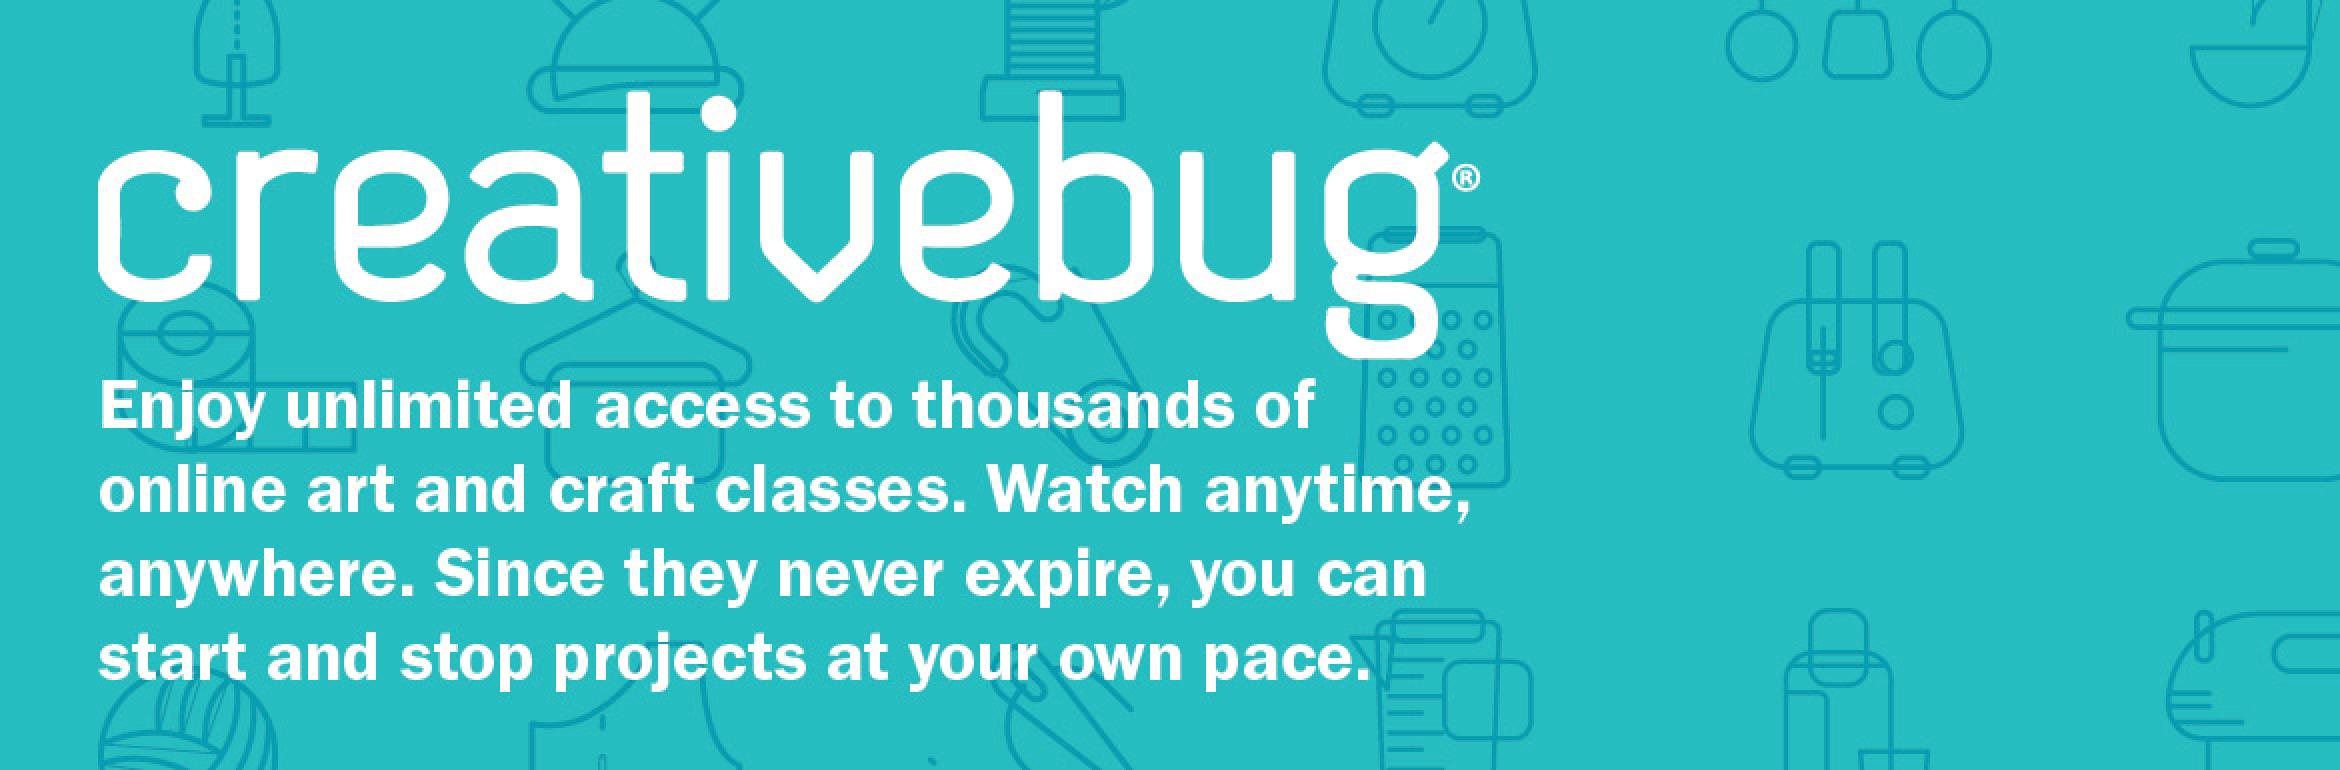 Creativebug. Enjoy unlimited access to thousands of online art and craft classes. Watch anytime, anywhere. Since they never expire, you can start and stop projects at your own pace.